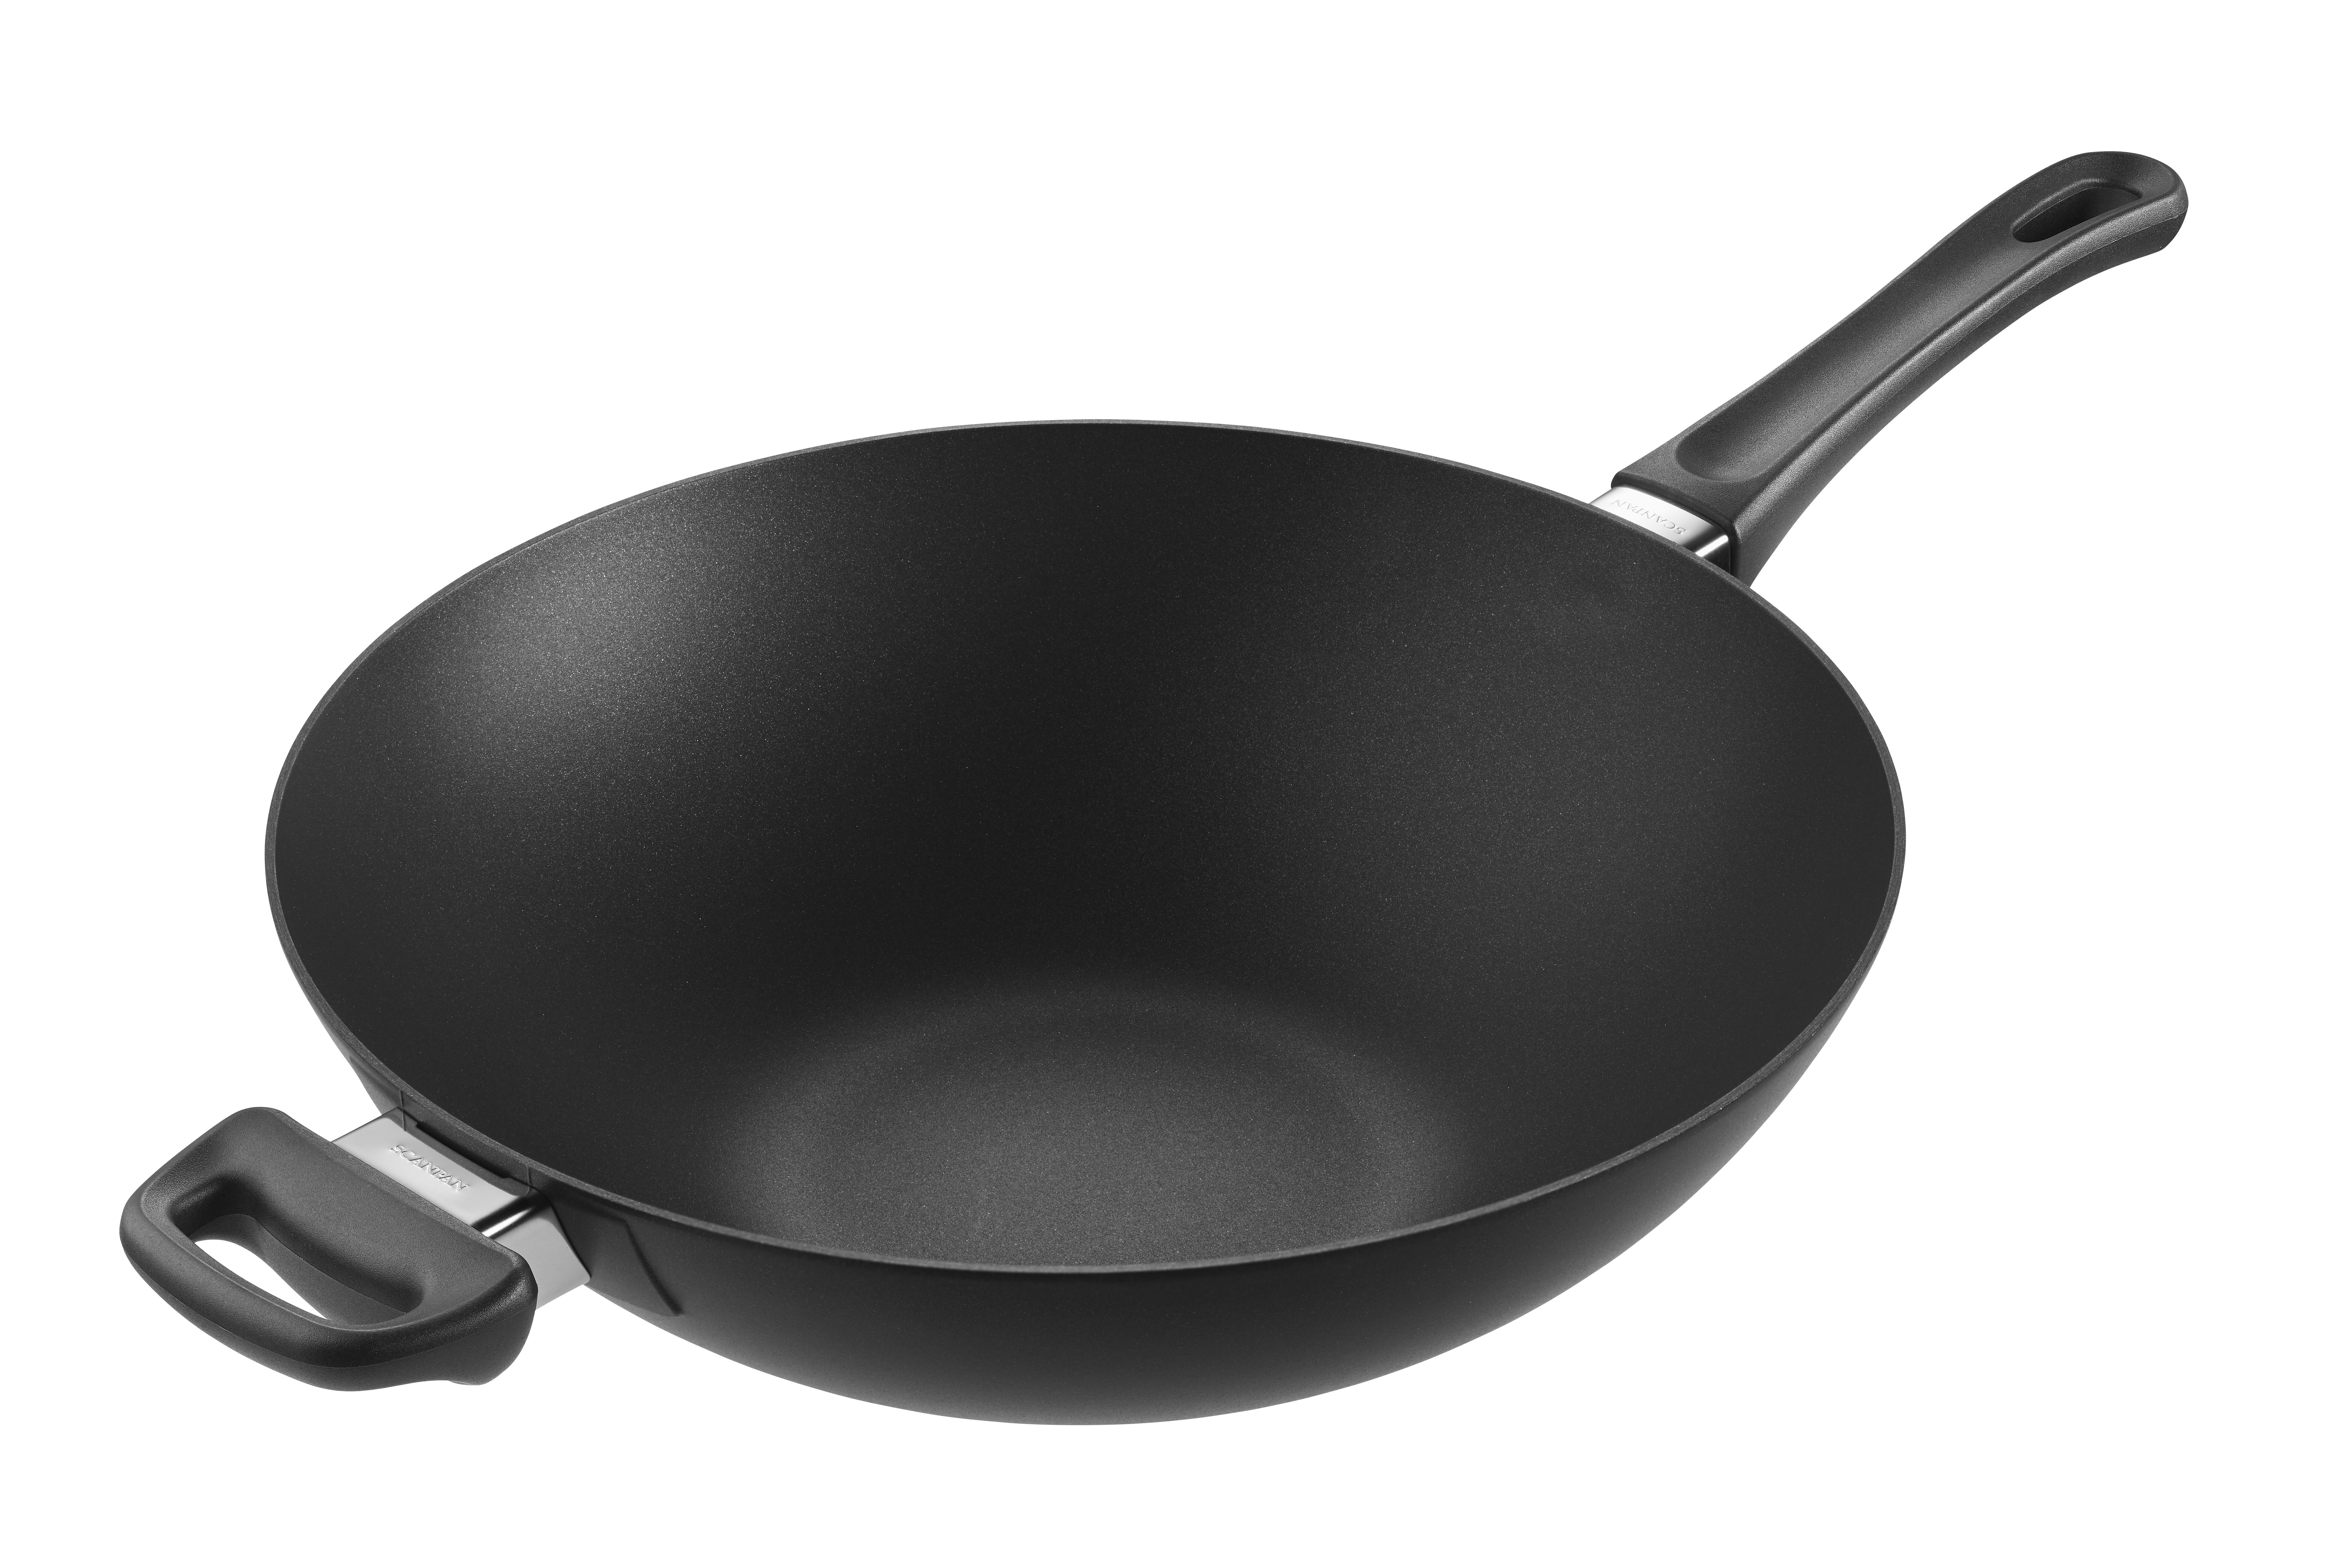 Carbon Steel Wok with Lid and Wooden Spatula, 12.5 Inch Flat Bottom Wok Pan  for Gas, Electric, and Induction Stoves, Heat-Resistant Handle and Glass  Lid with Stand, Versatile Stir Fry Pan